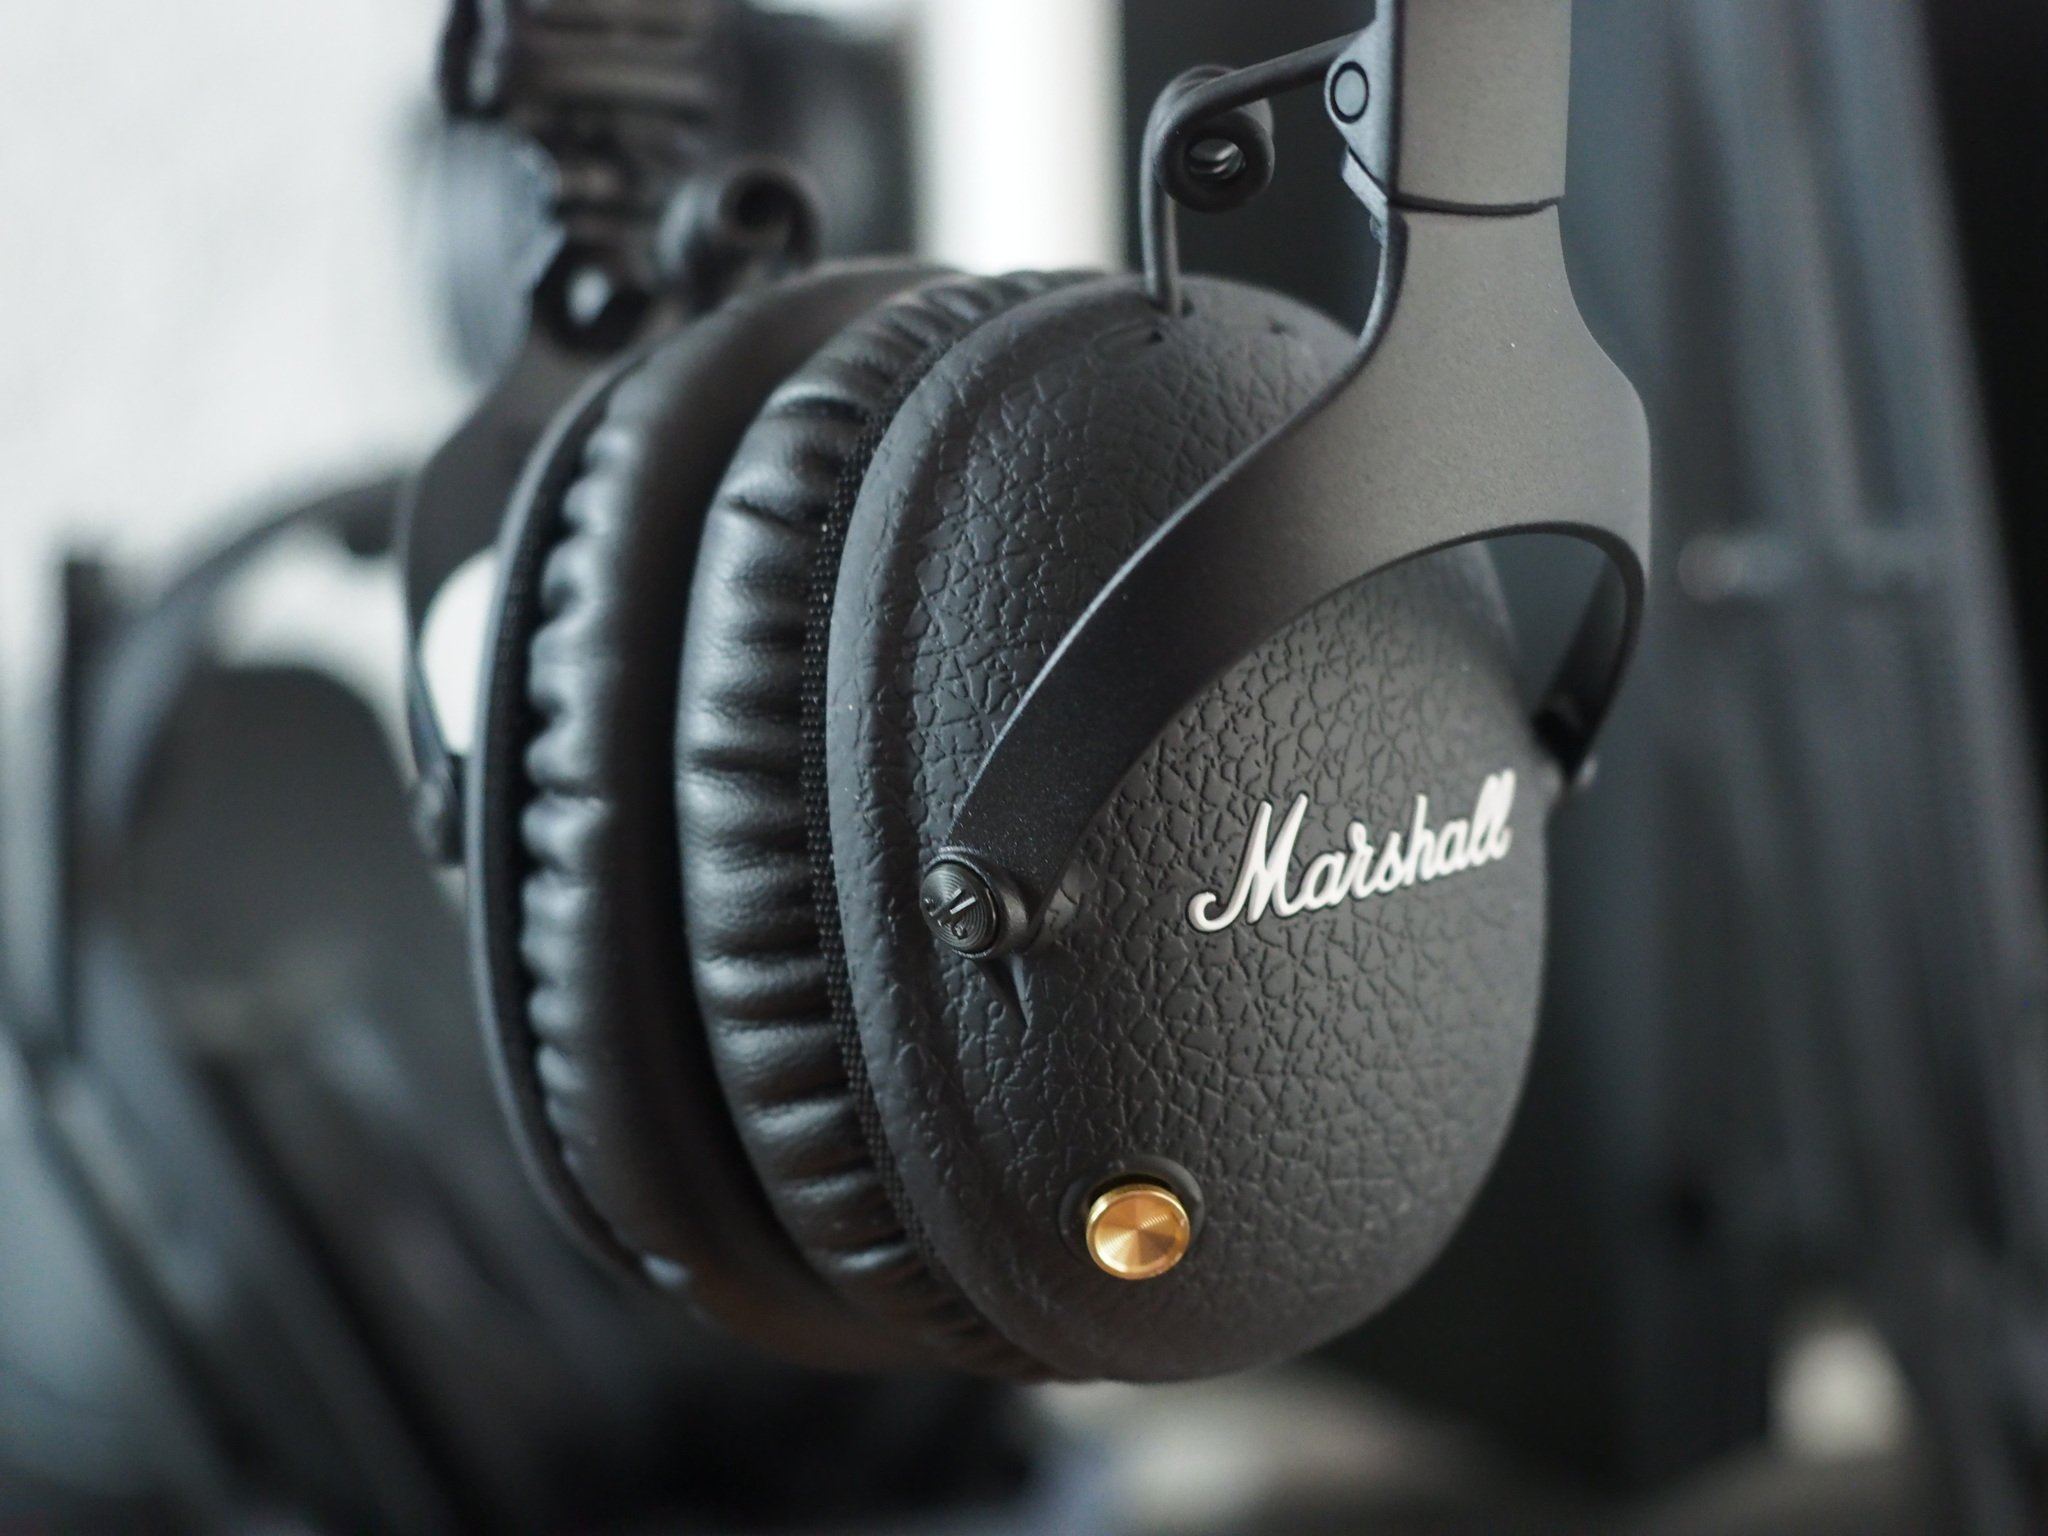 Marshall Monitor II ANC headphones review: When the sound is